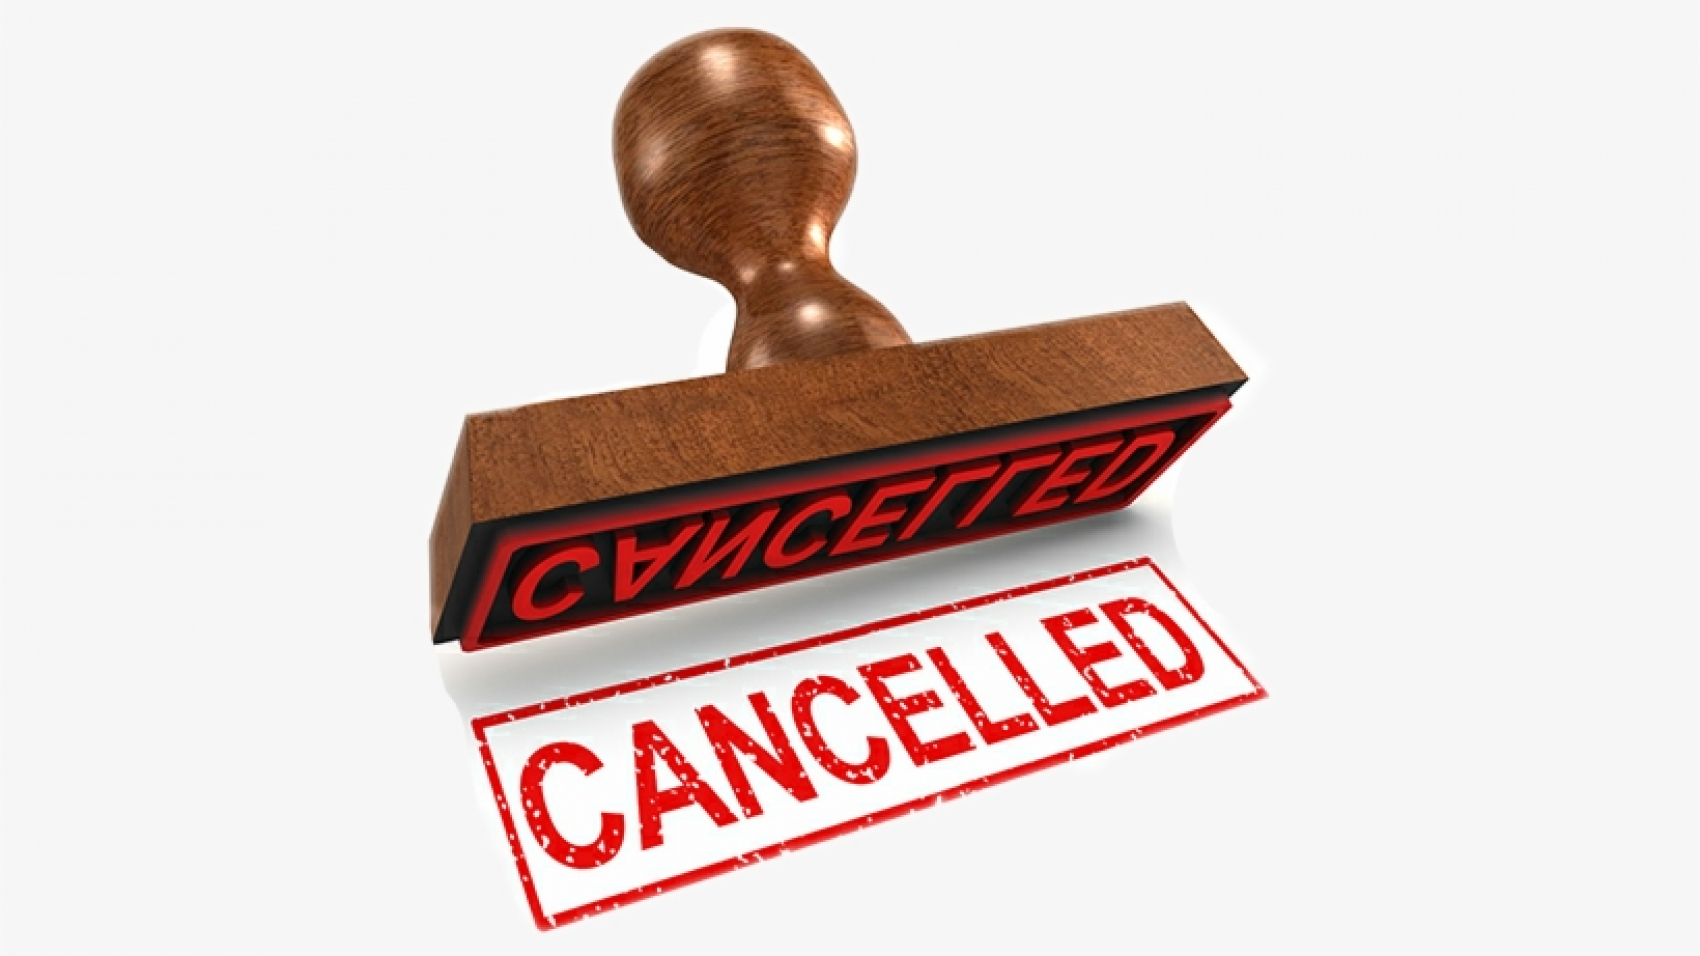 214-2146899_cancelled-rubber-stamp